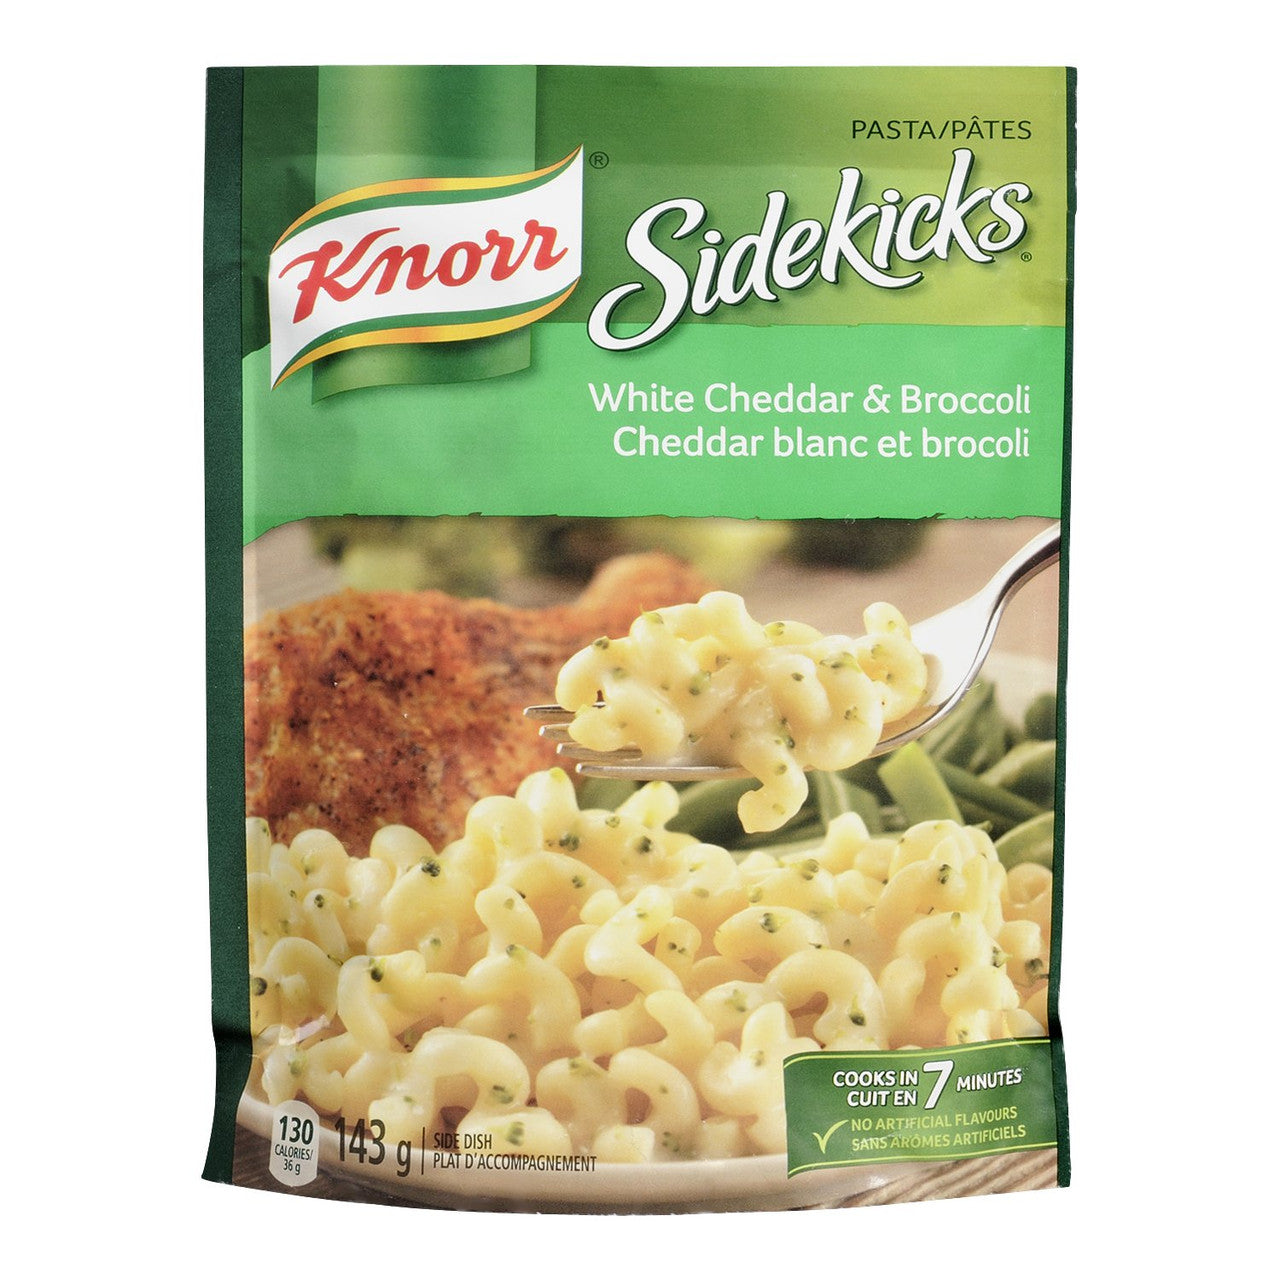 Knorr Sidekicks, White Cheddar & Broccoli, Pasta Side Dish, 143g/5oz., (2 pack) {Imported from Canada}